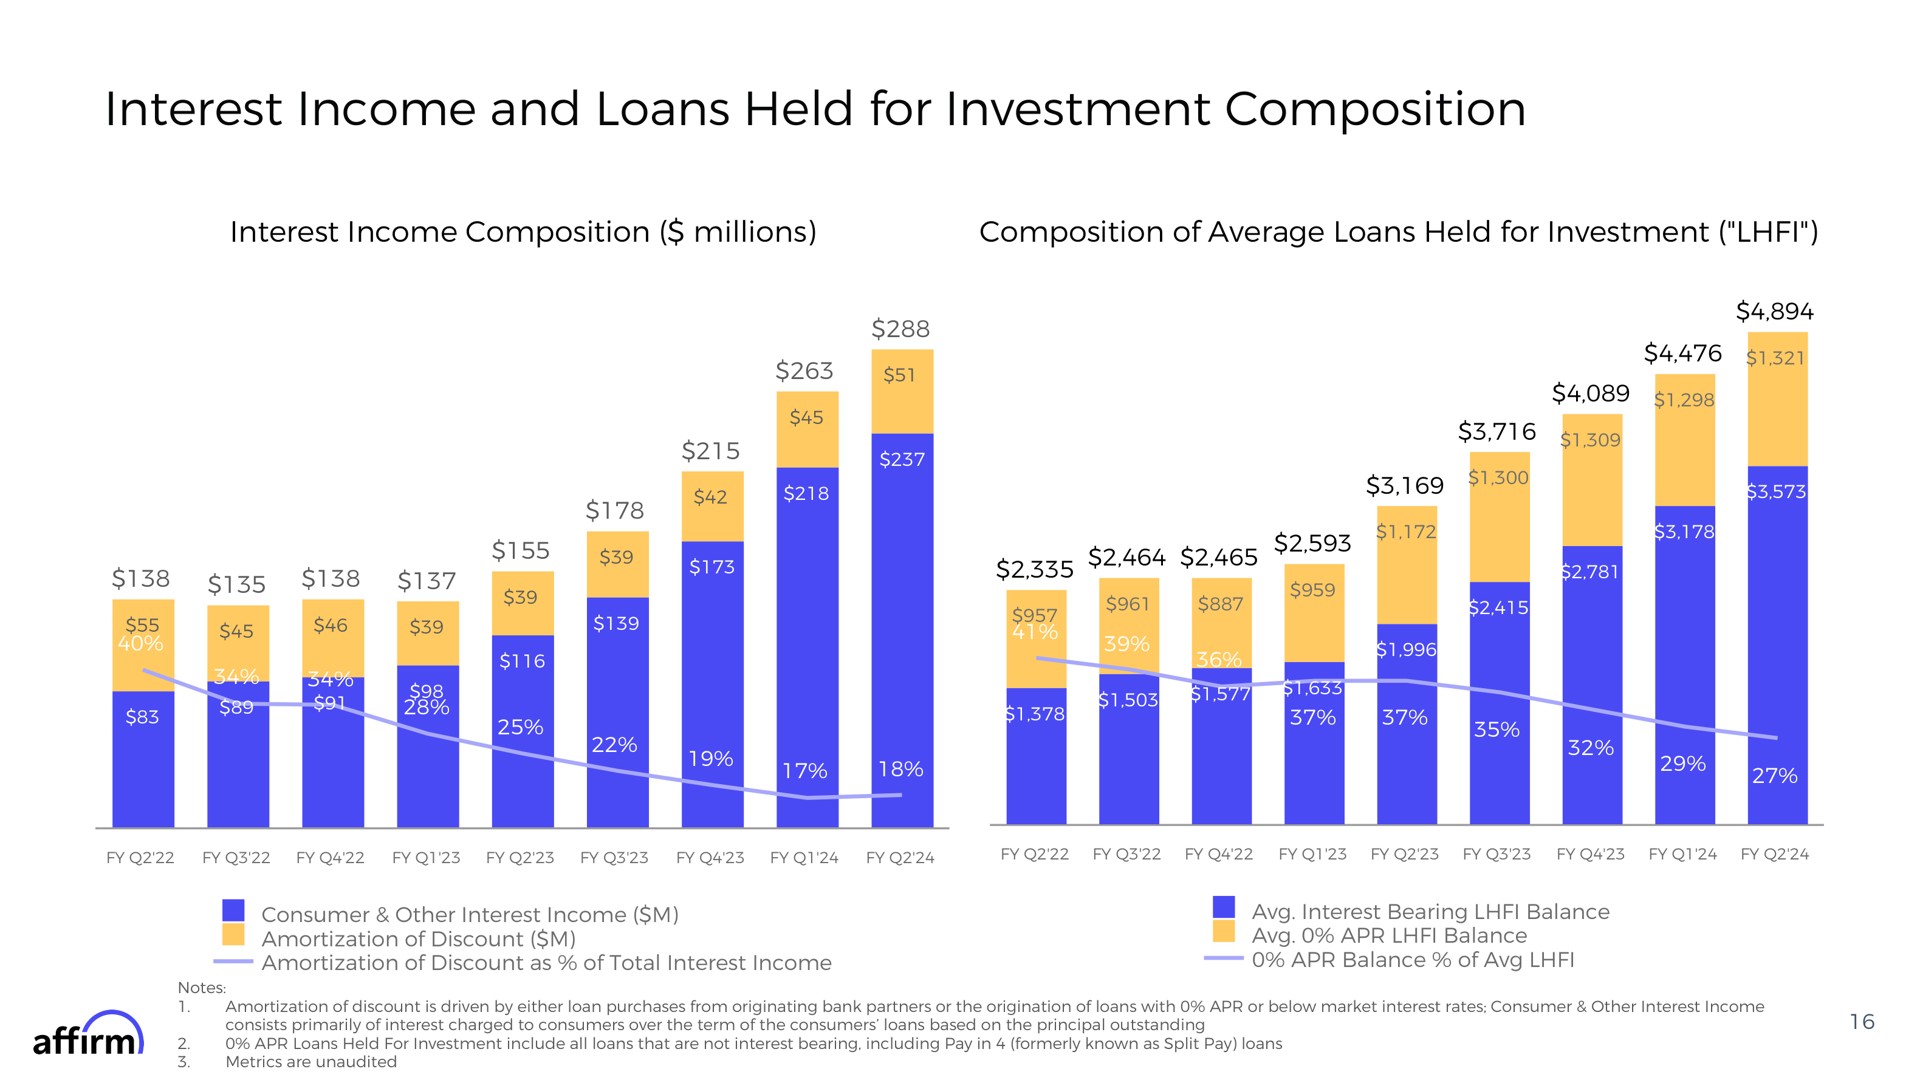 interest income and loans held for investment composition interest income composition millions composition of average loans held for investment wees a wee did fun | Affirm